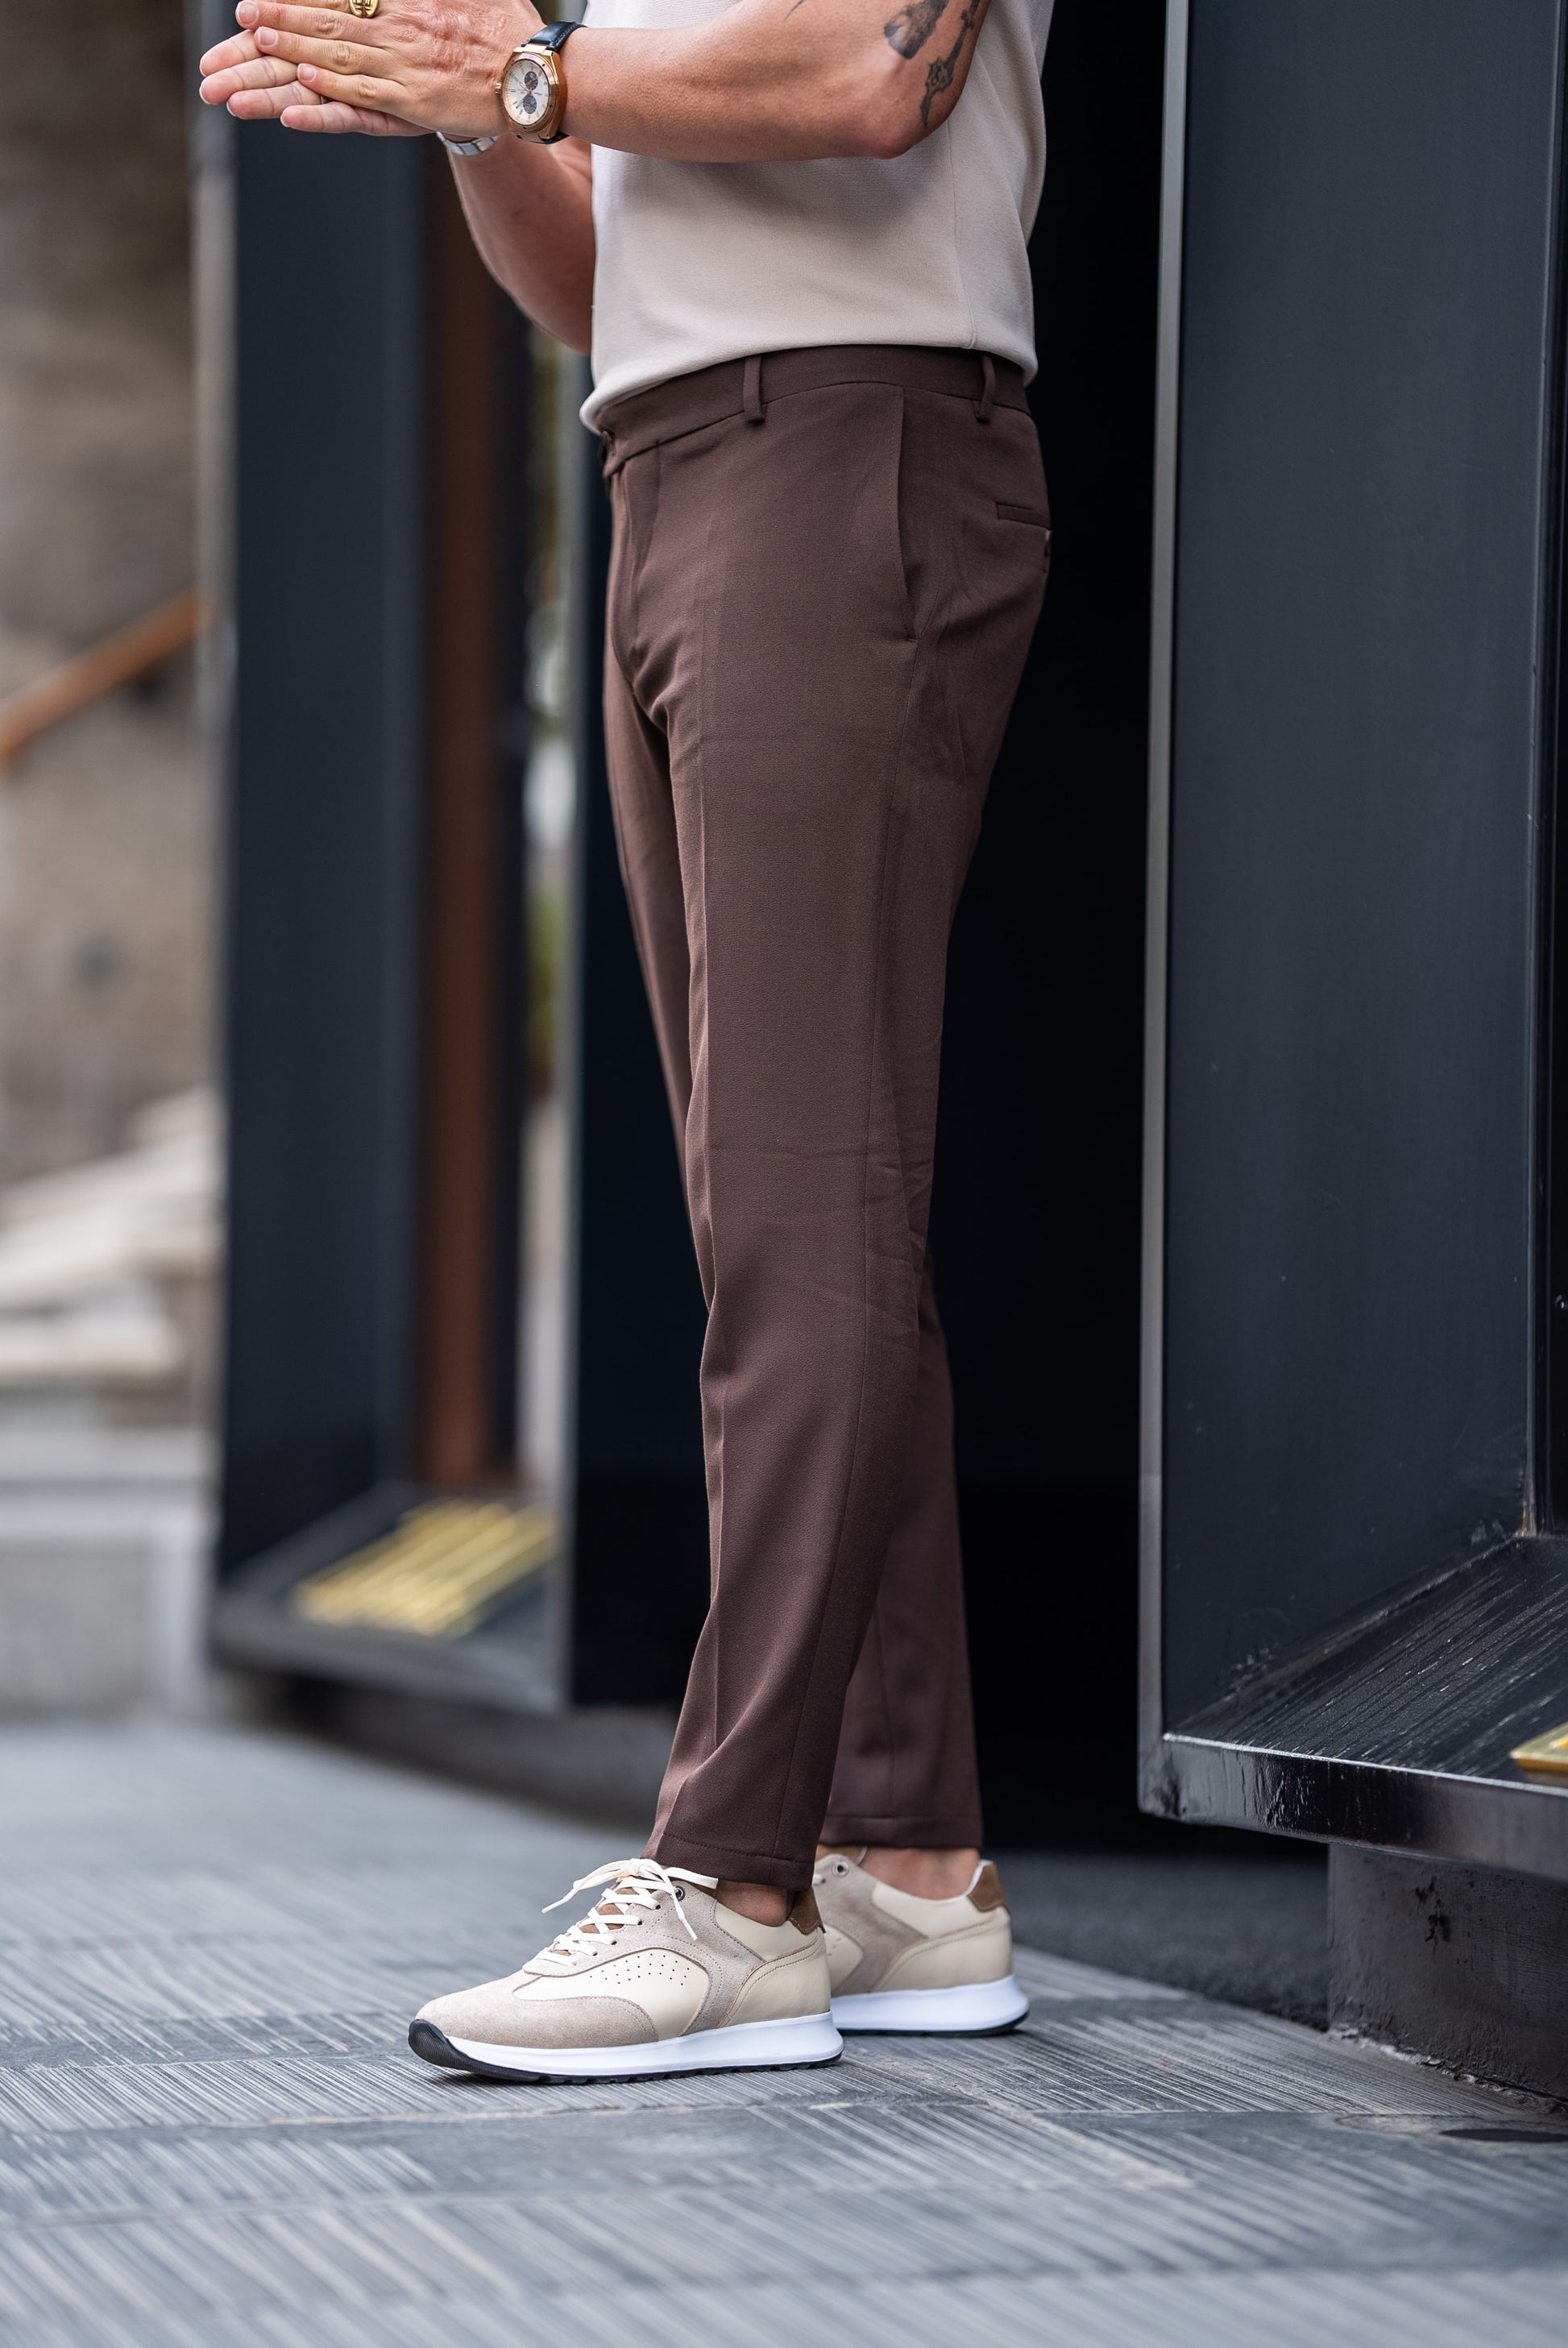 A Brown Trousers on display